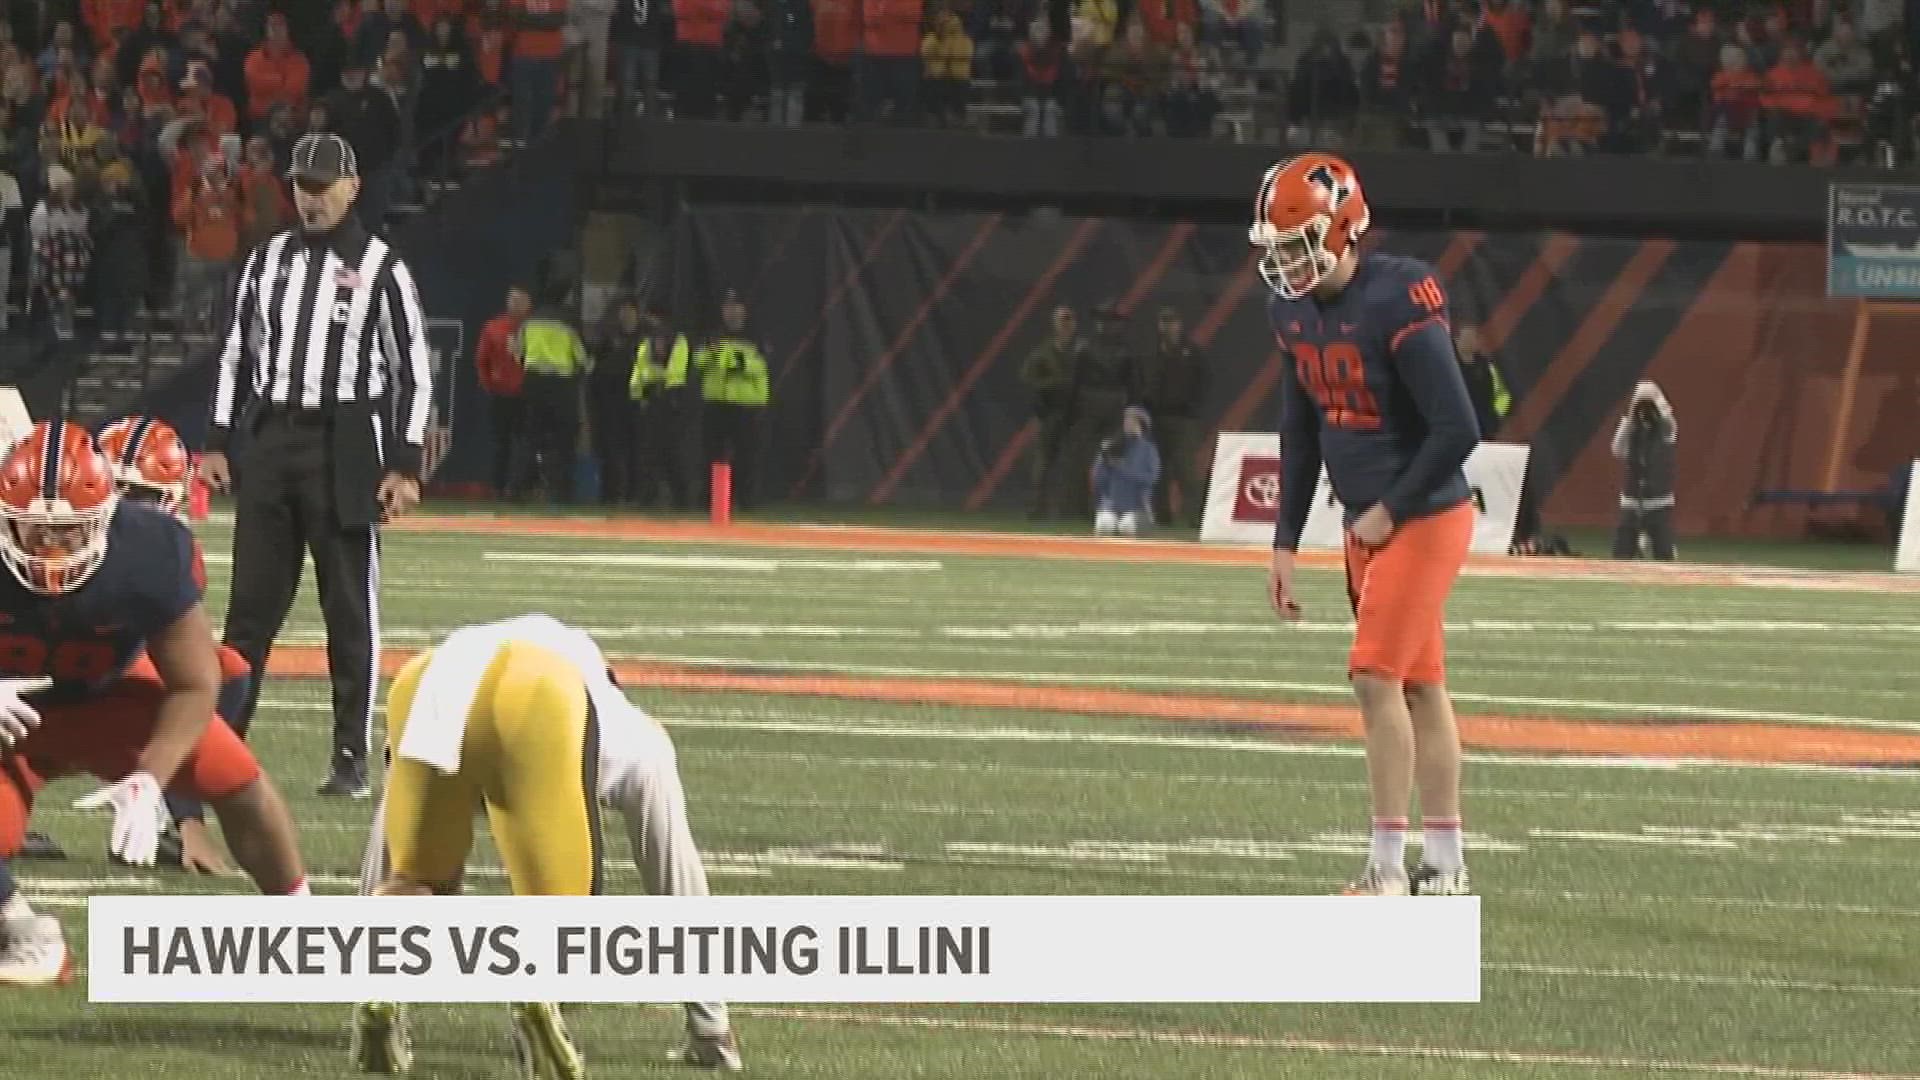 A field goal was once again the difference for the Illini, who beat Iowa in 2008 on Matt Eller’s 46-yard field goal with 24 seconds to go.